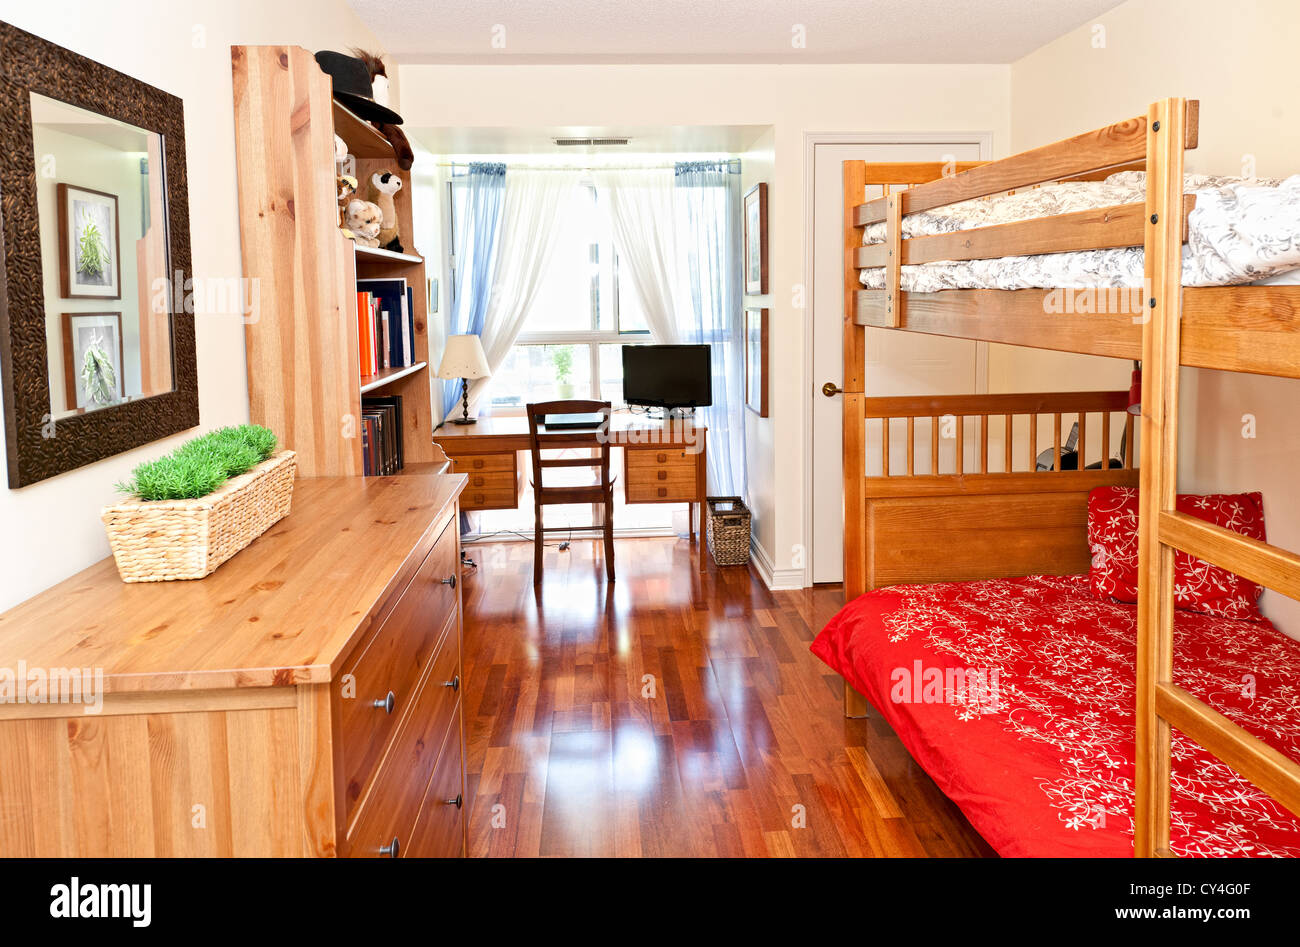 Student bedroom with hardwood floor and bunk beds - artwork is from photographer portfolio Stock Photo